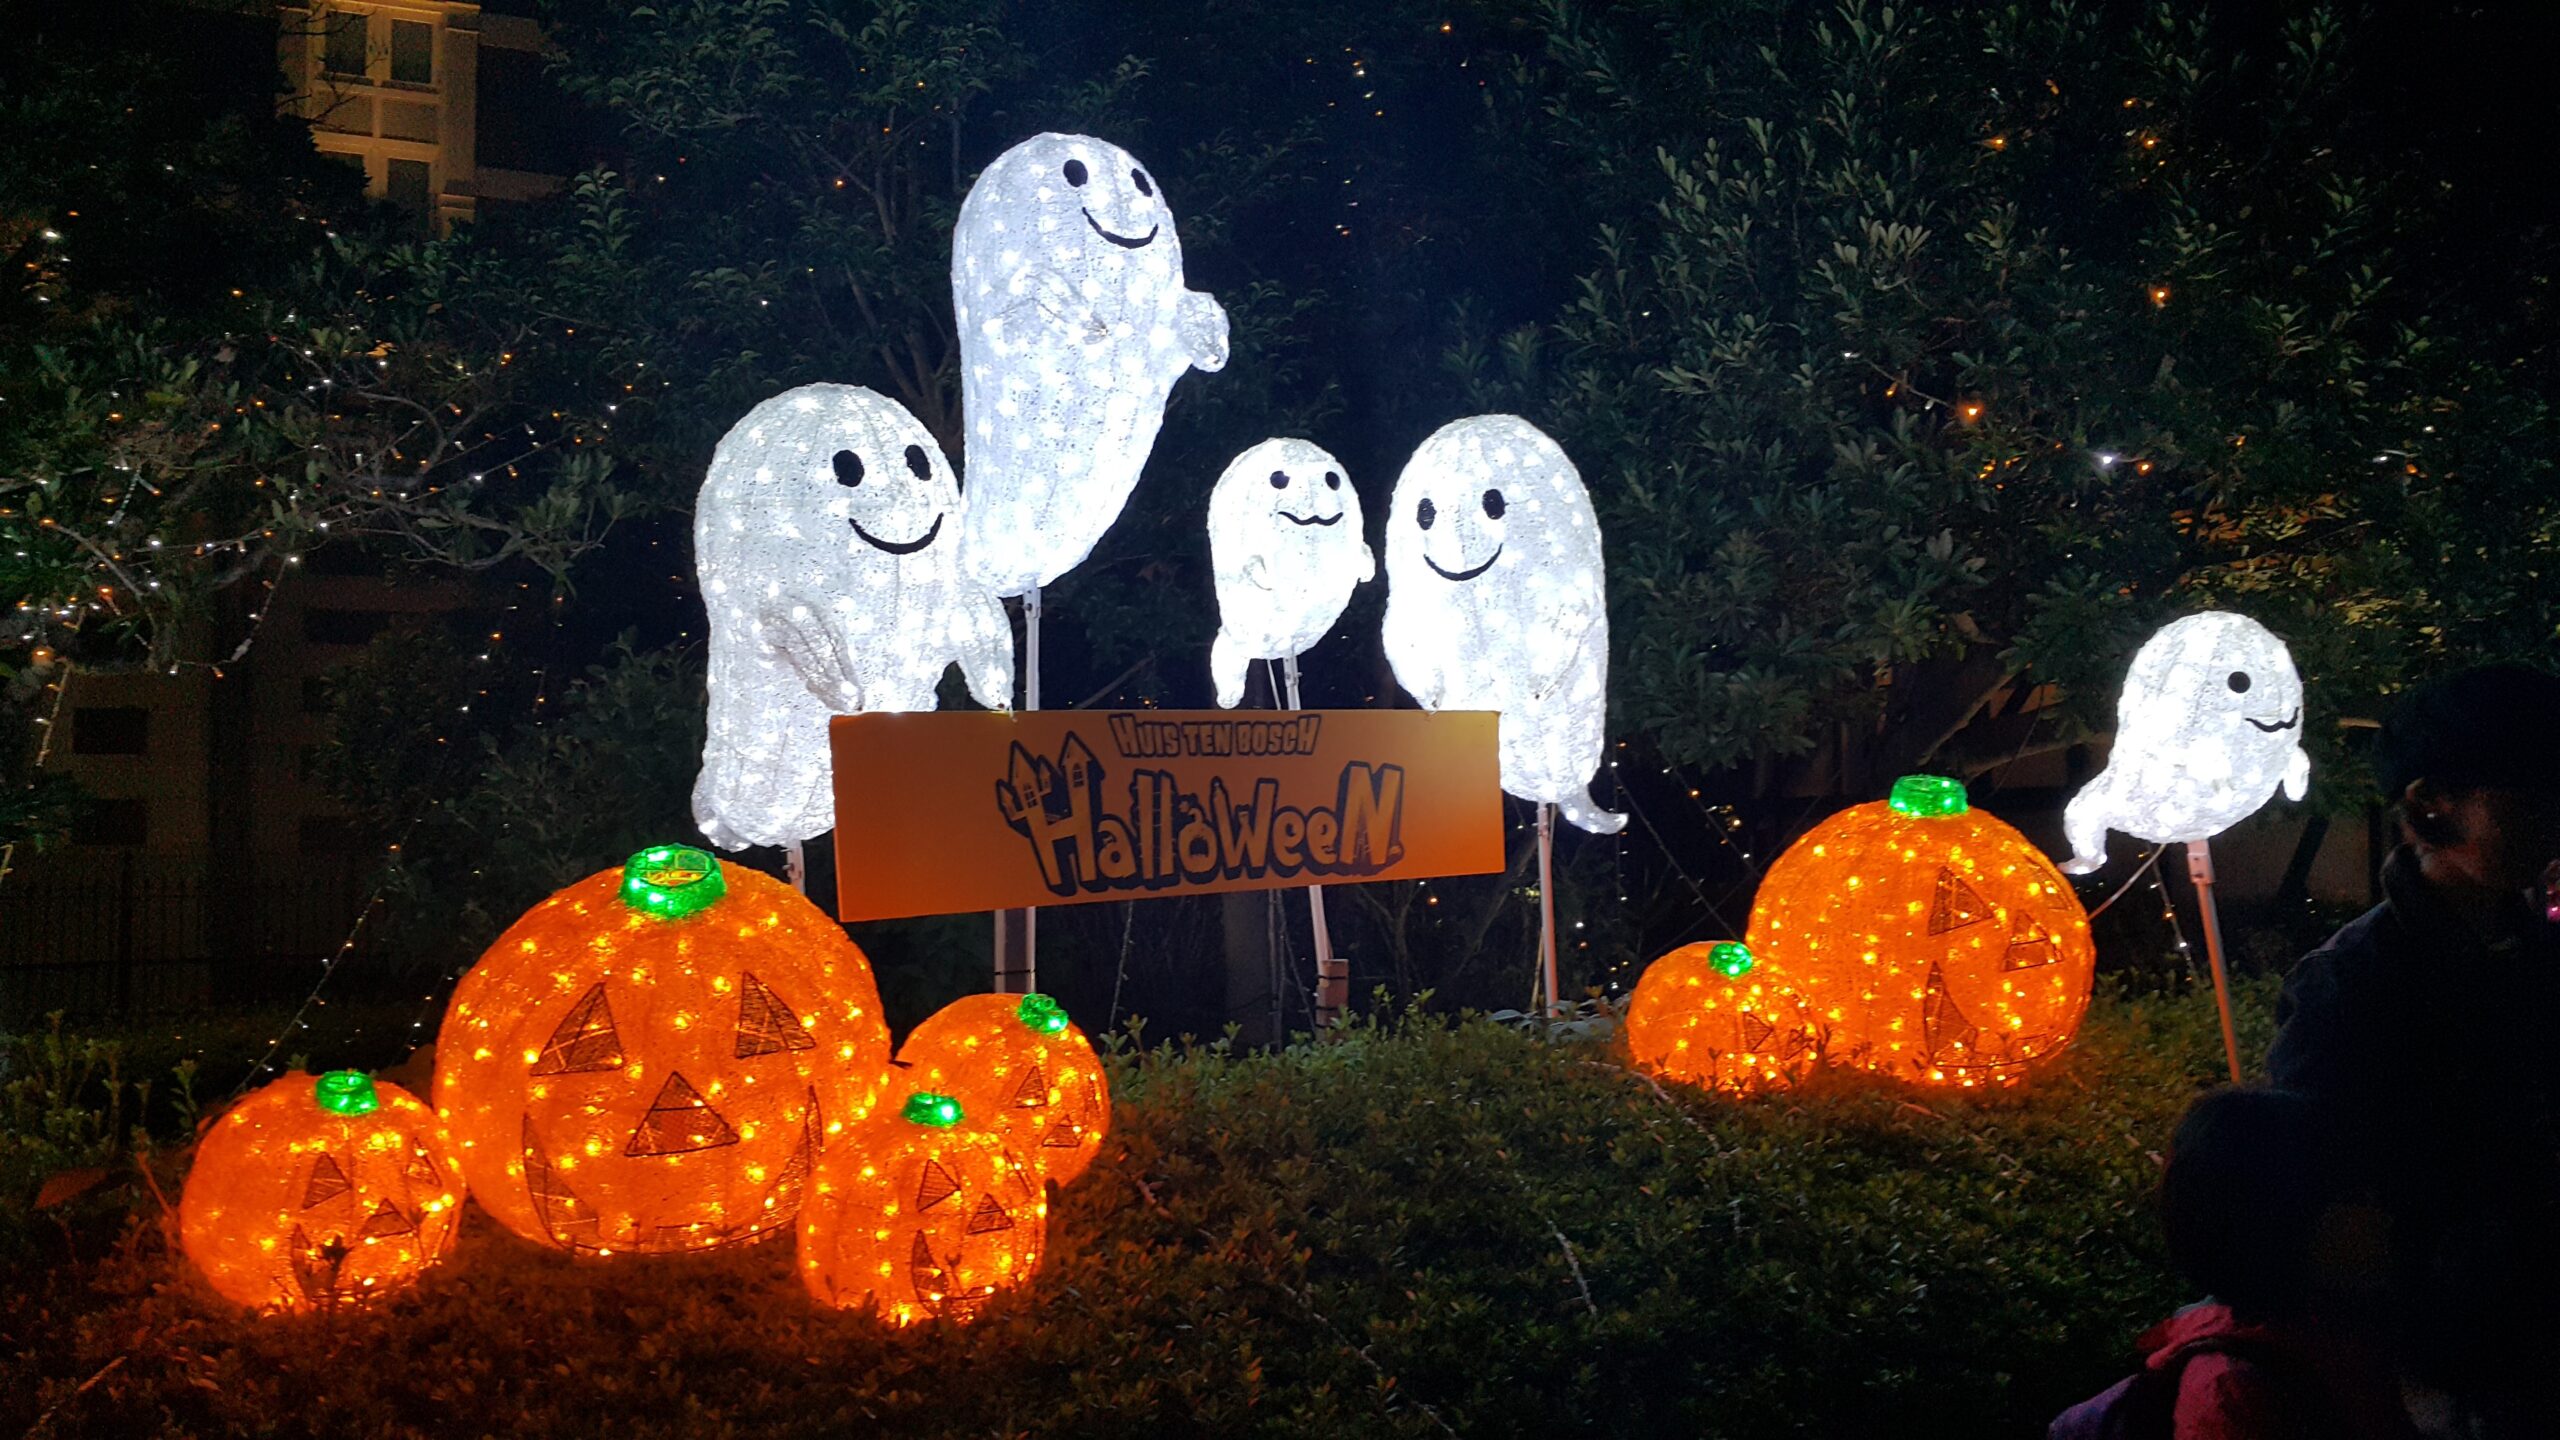 Ghost and pumpkin decorations for deep autumn color palettes. Pictured: Lit up ghost and pumpkin decorations.